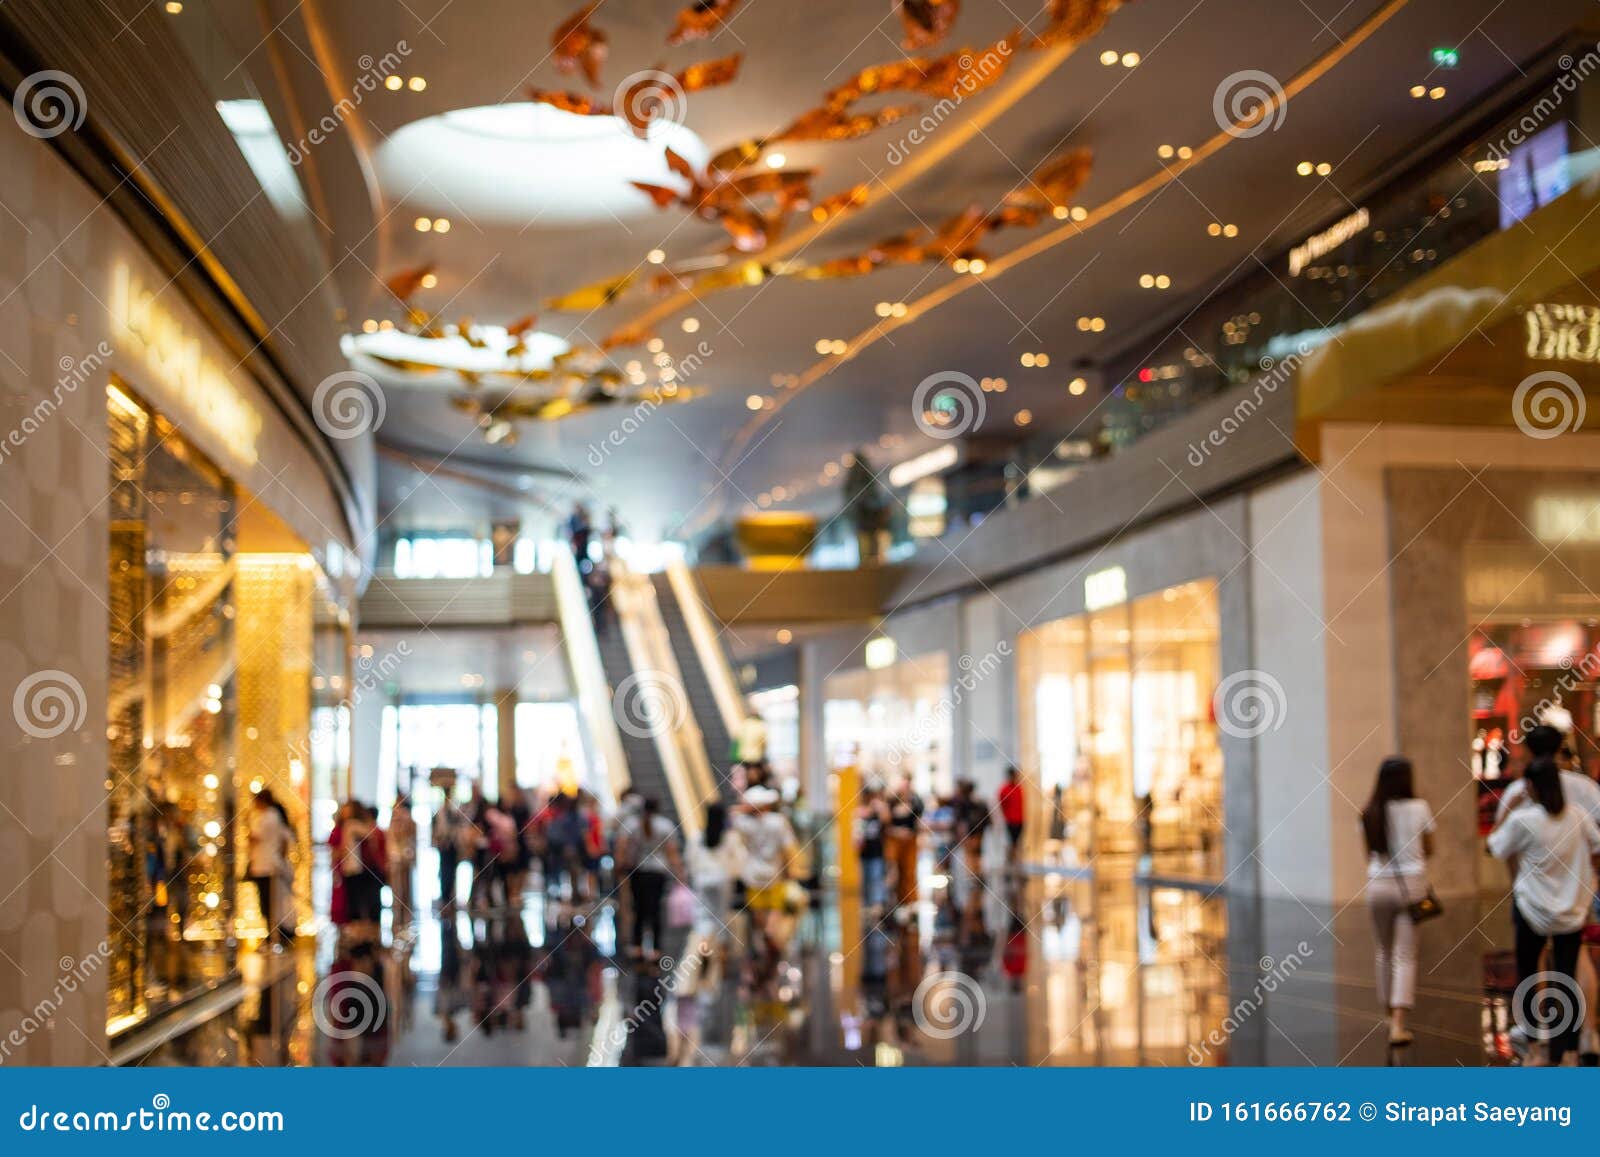 Shopping mall background creative imagepicture free download  500764714lovepikcom